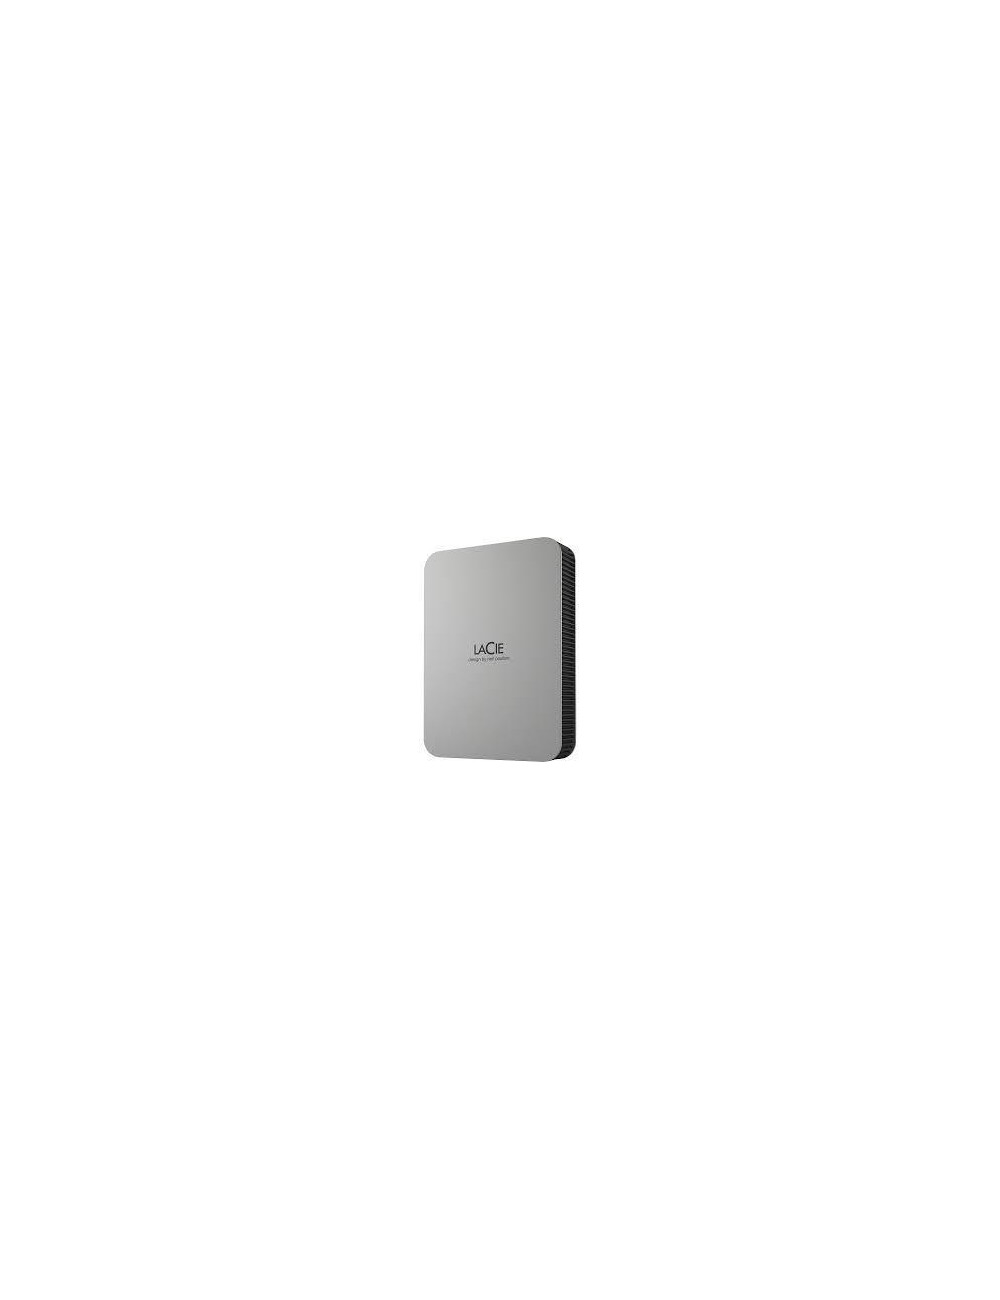 External HDD|LACIE|Mobile Drive Secure|STLR2000400|2TB|USB-C|USB 3.2|Colour Space Gray|STLR2000400